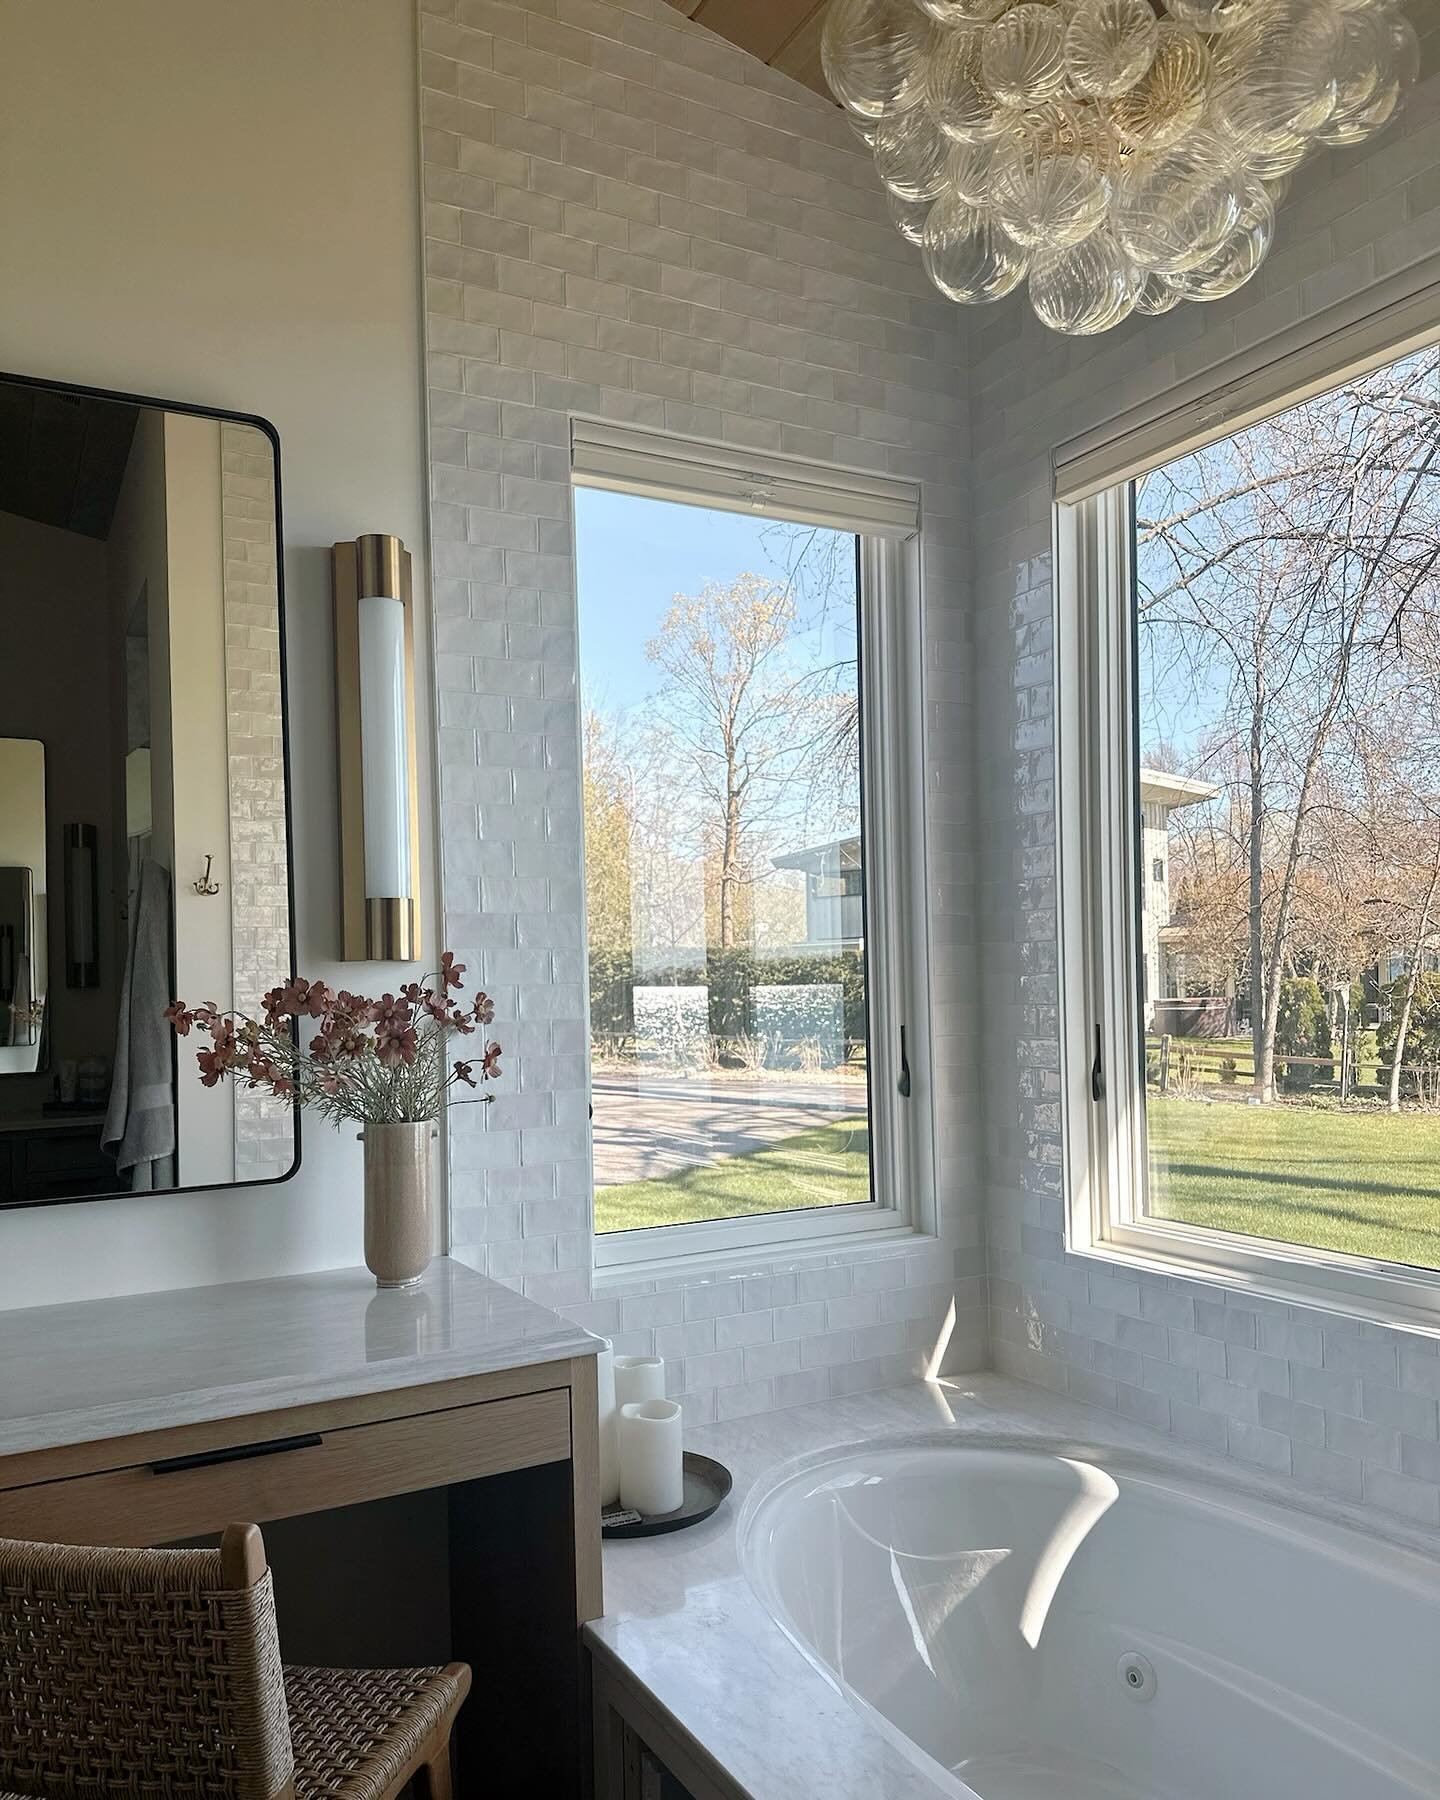 Take a glimpse into this primary bathroom suite featuring a gorgeous built-in tub embraced by quartz and tile, complemented by the delicate charm of this artisanal glass chandelier. It&rsquo;s time to unwind in pure style! #BathroomSneakPeek #DreamHo